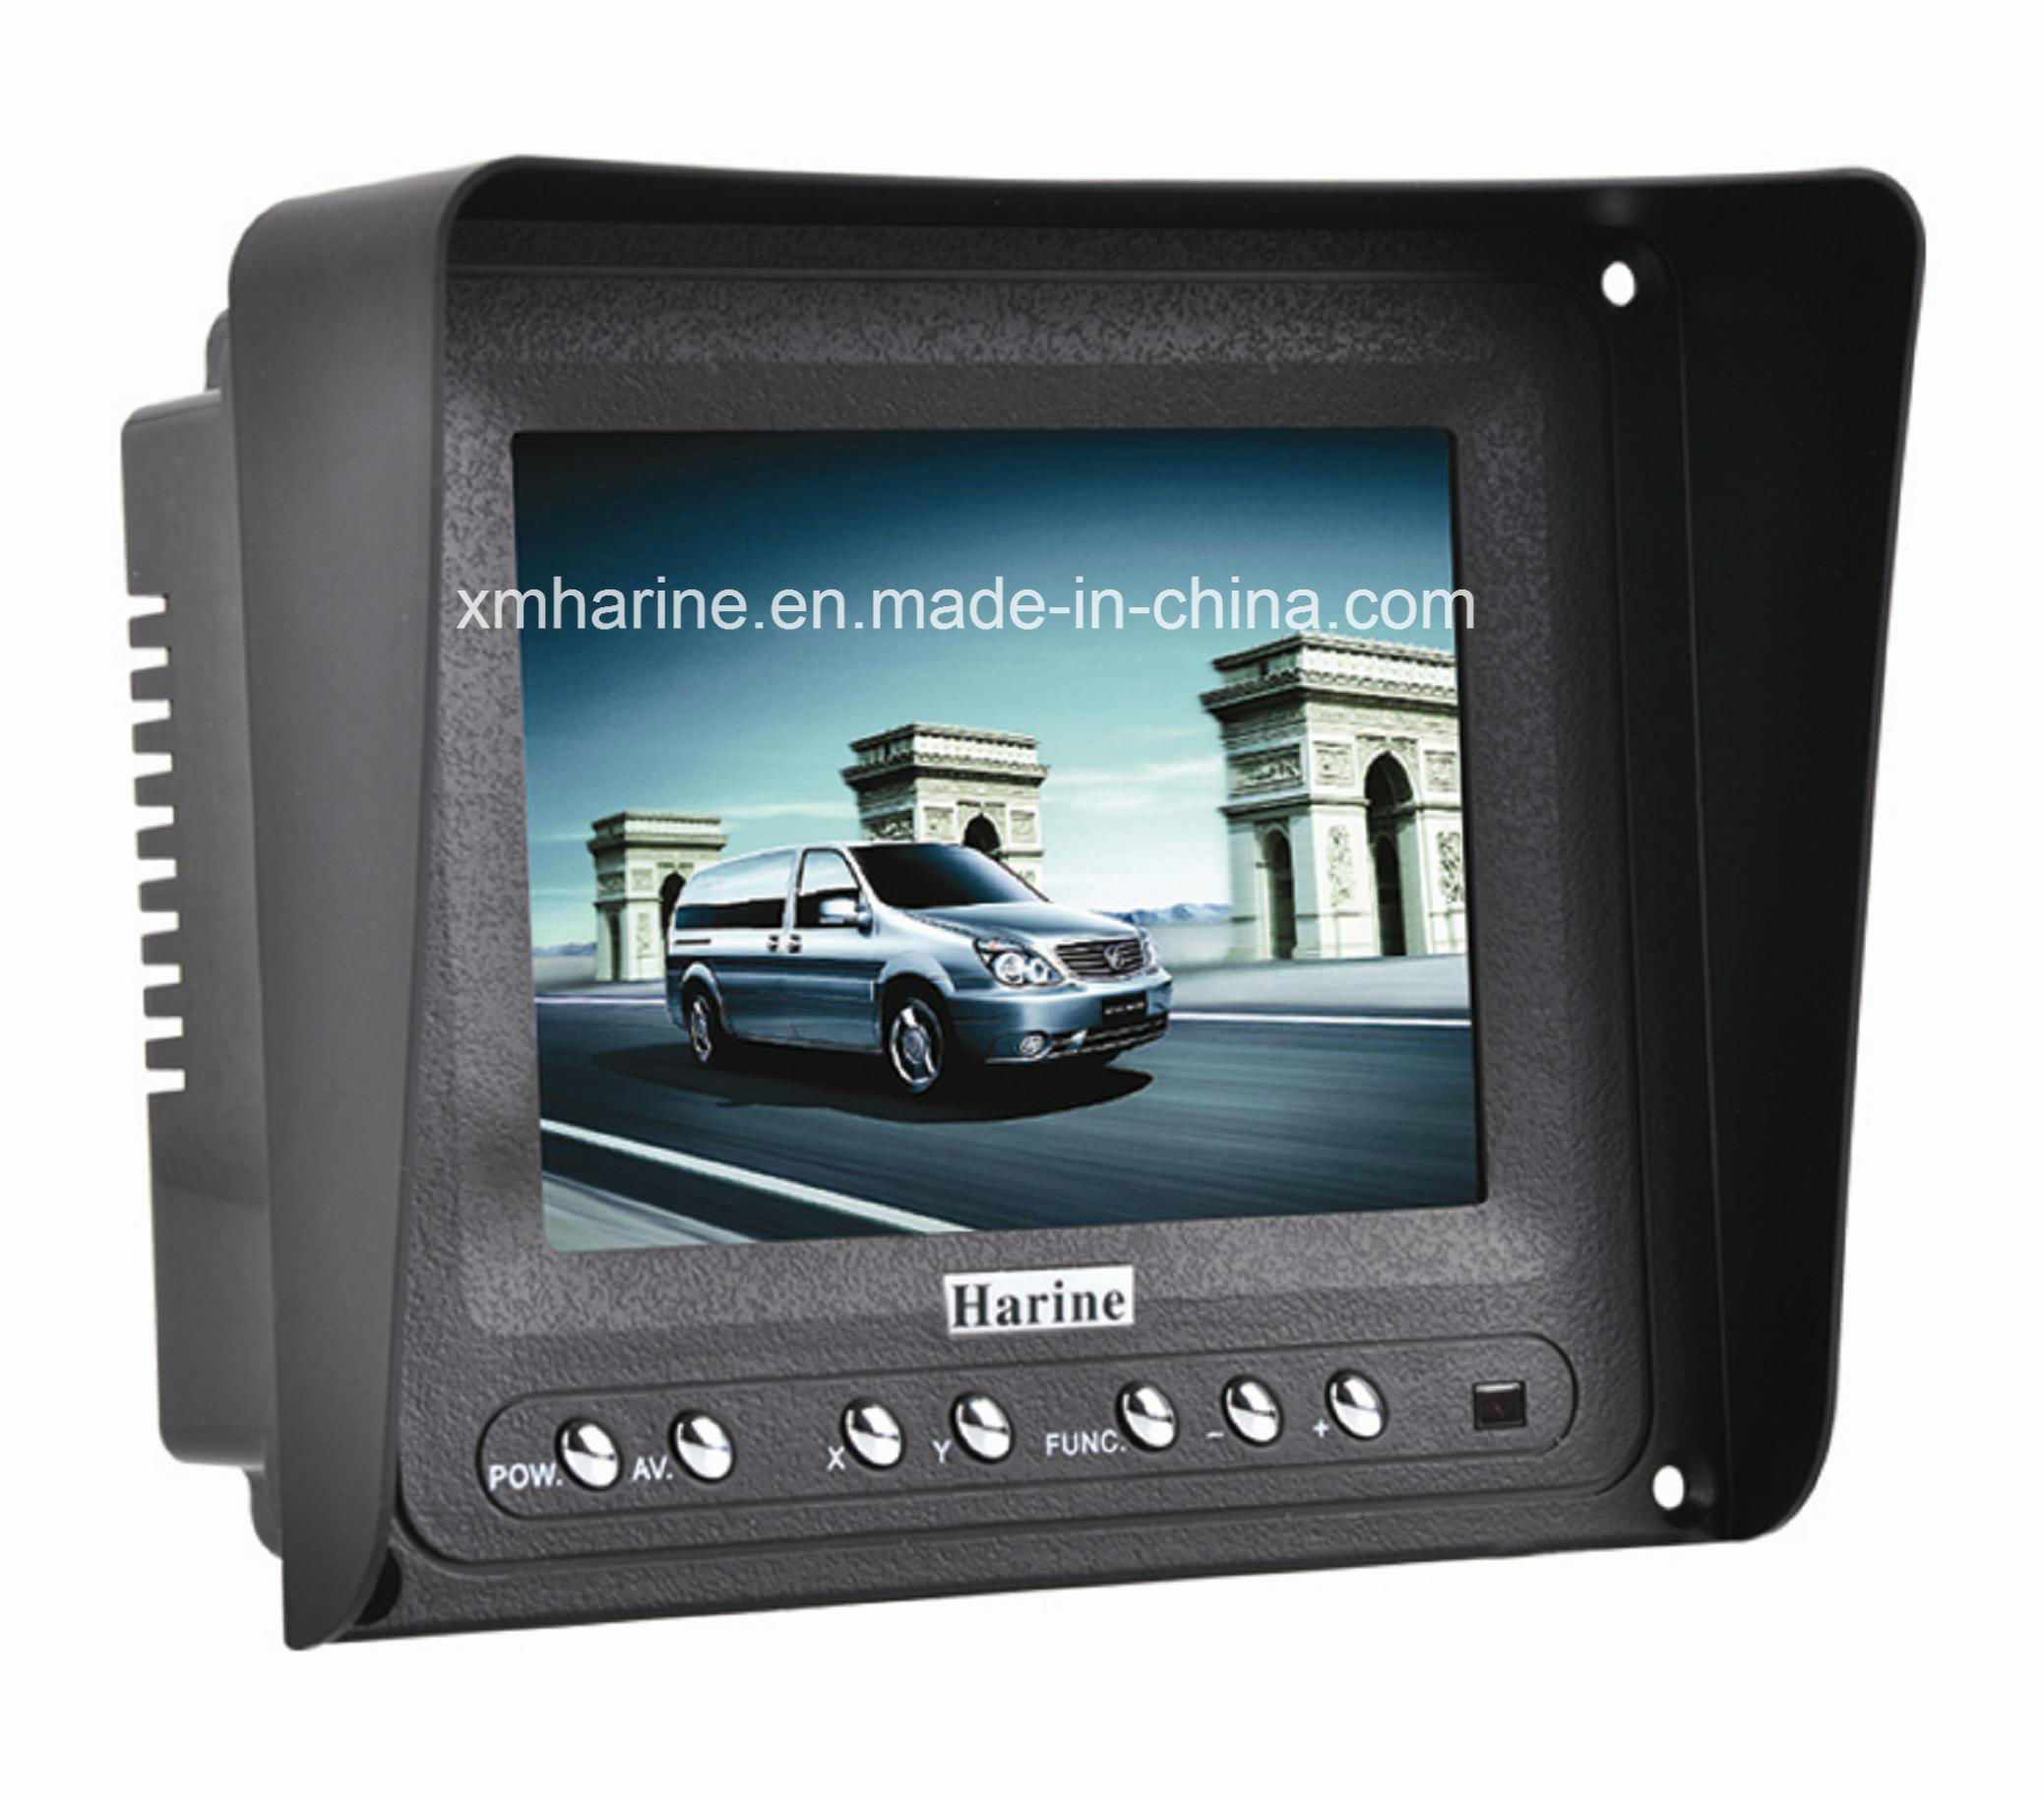 5.6inches LCD Color Car Monitor Rear View System